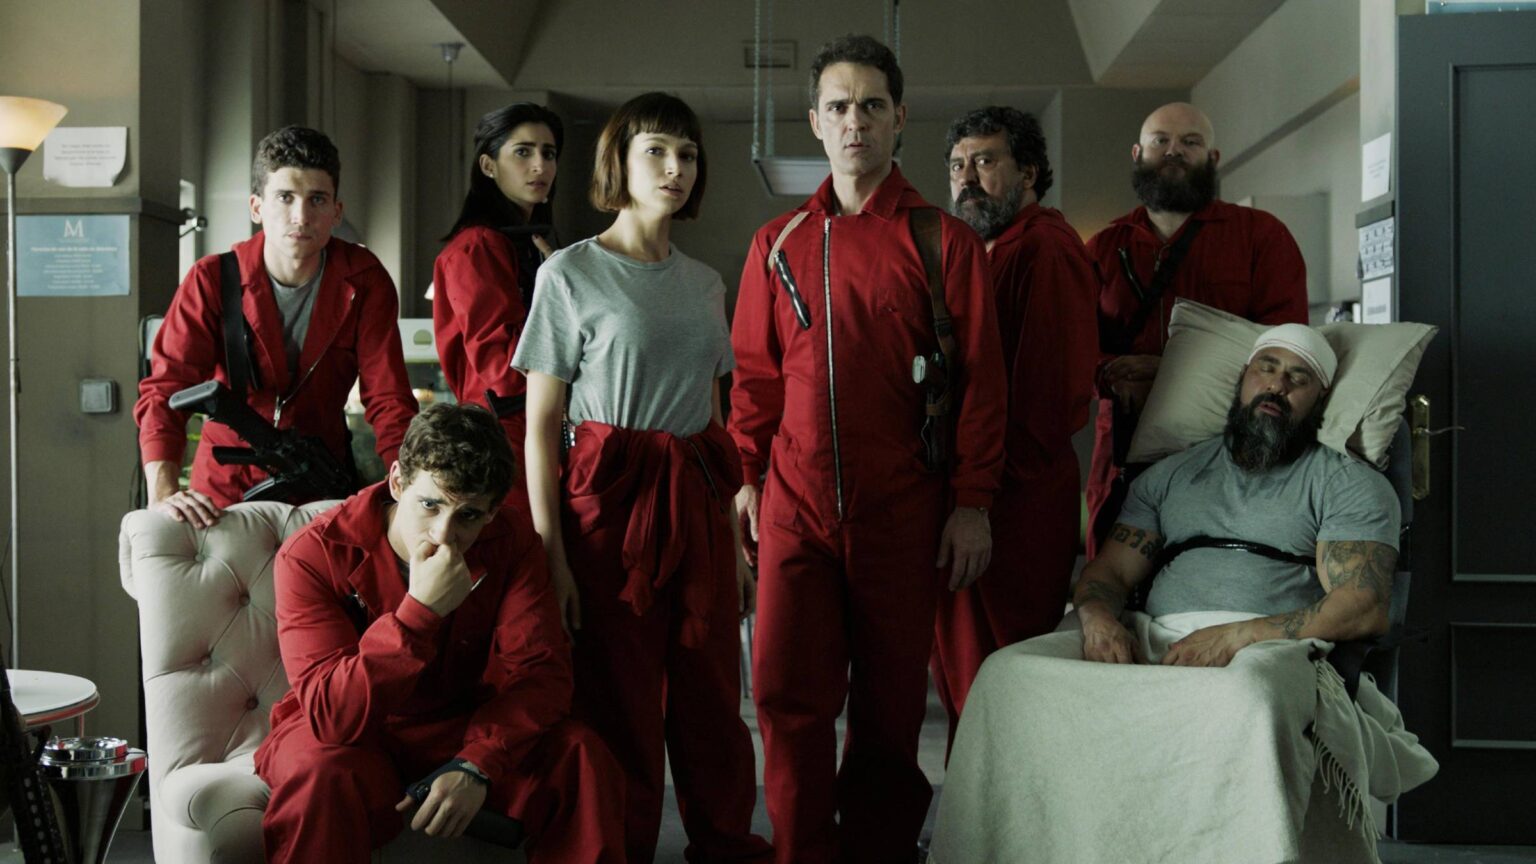 Spanish series 'La Casa de Papel', better known as 'Money Heist' is coming back to Netflix with season 5. What will happen to Lisbon?